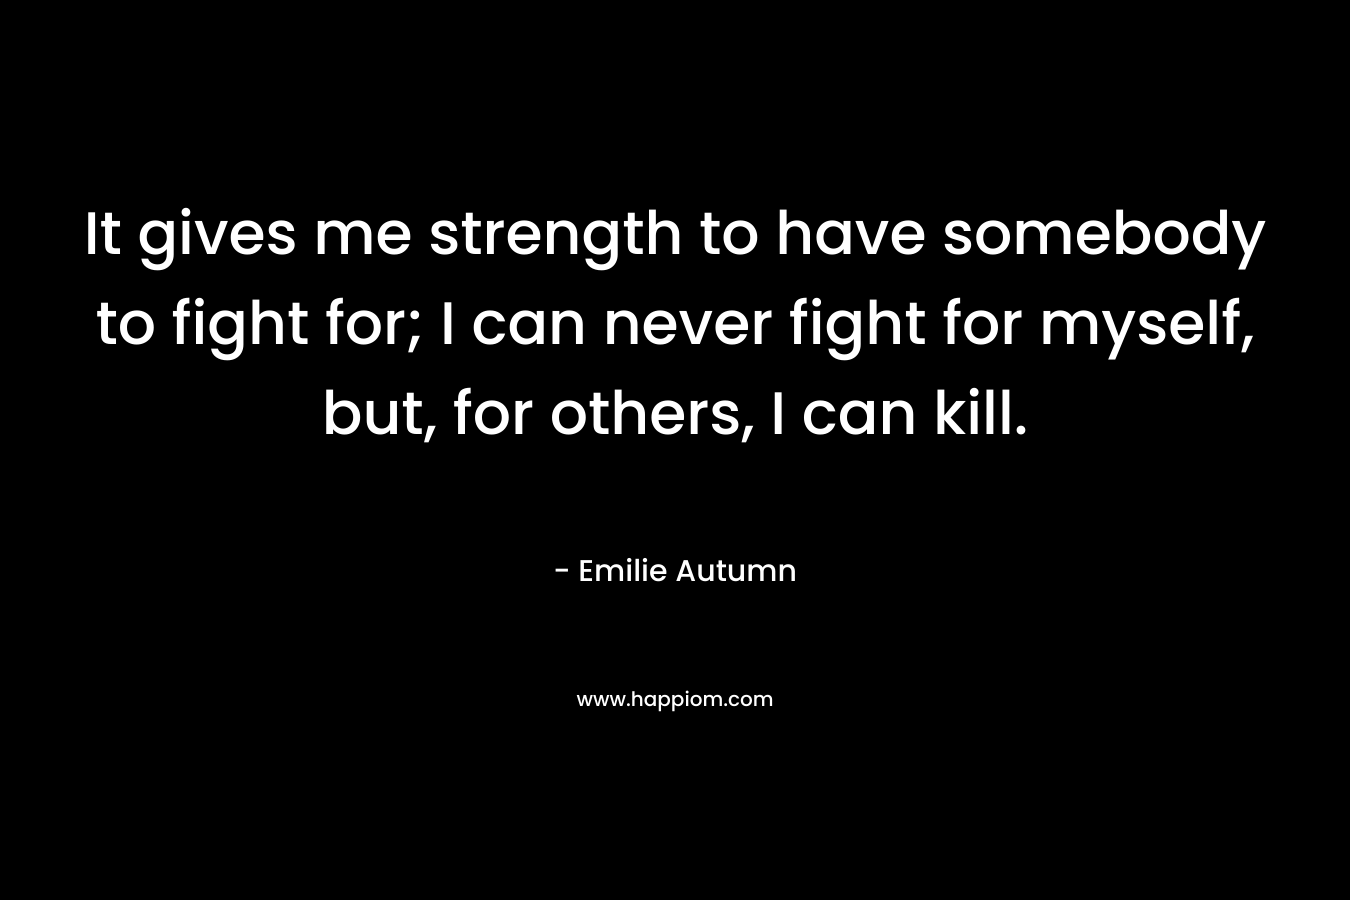 It gives me strength to have somebody to fight for; I can never fight for myself, but, for others, I can kill.